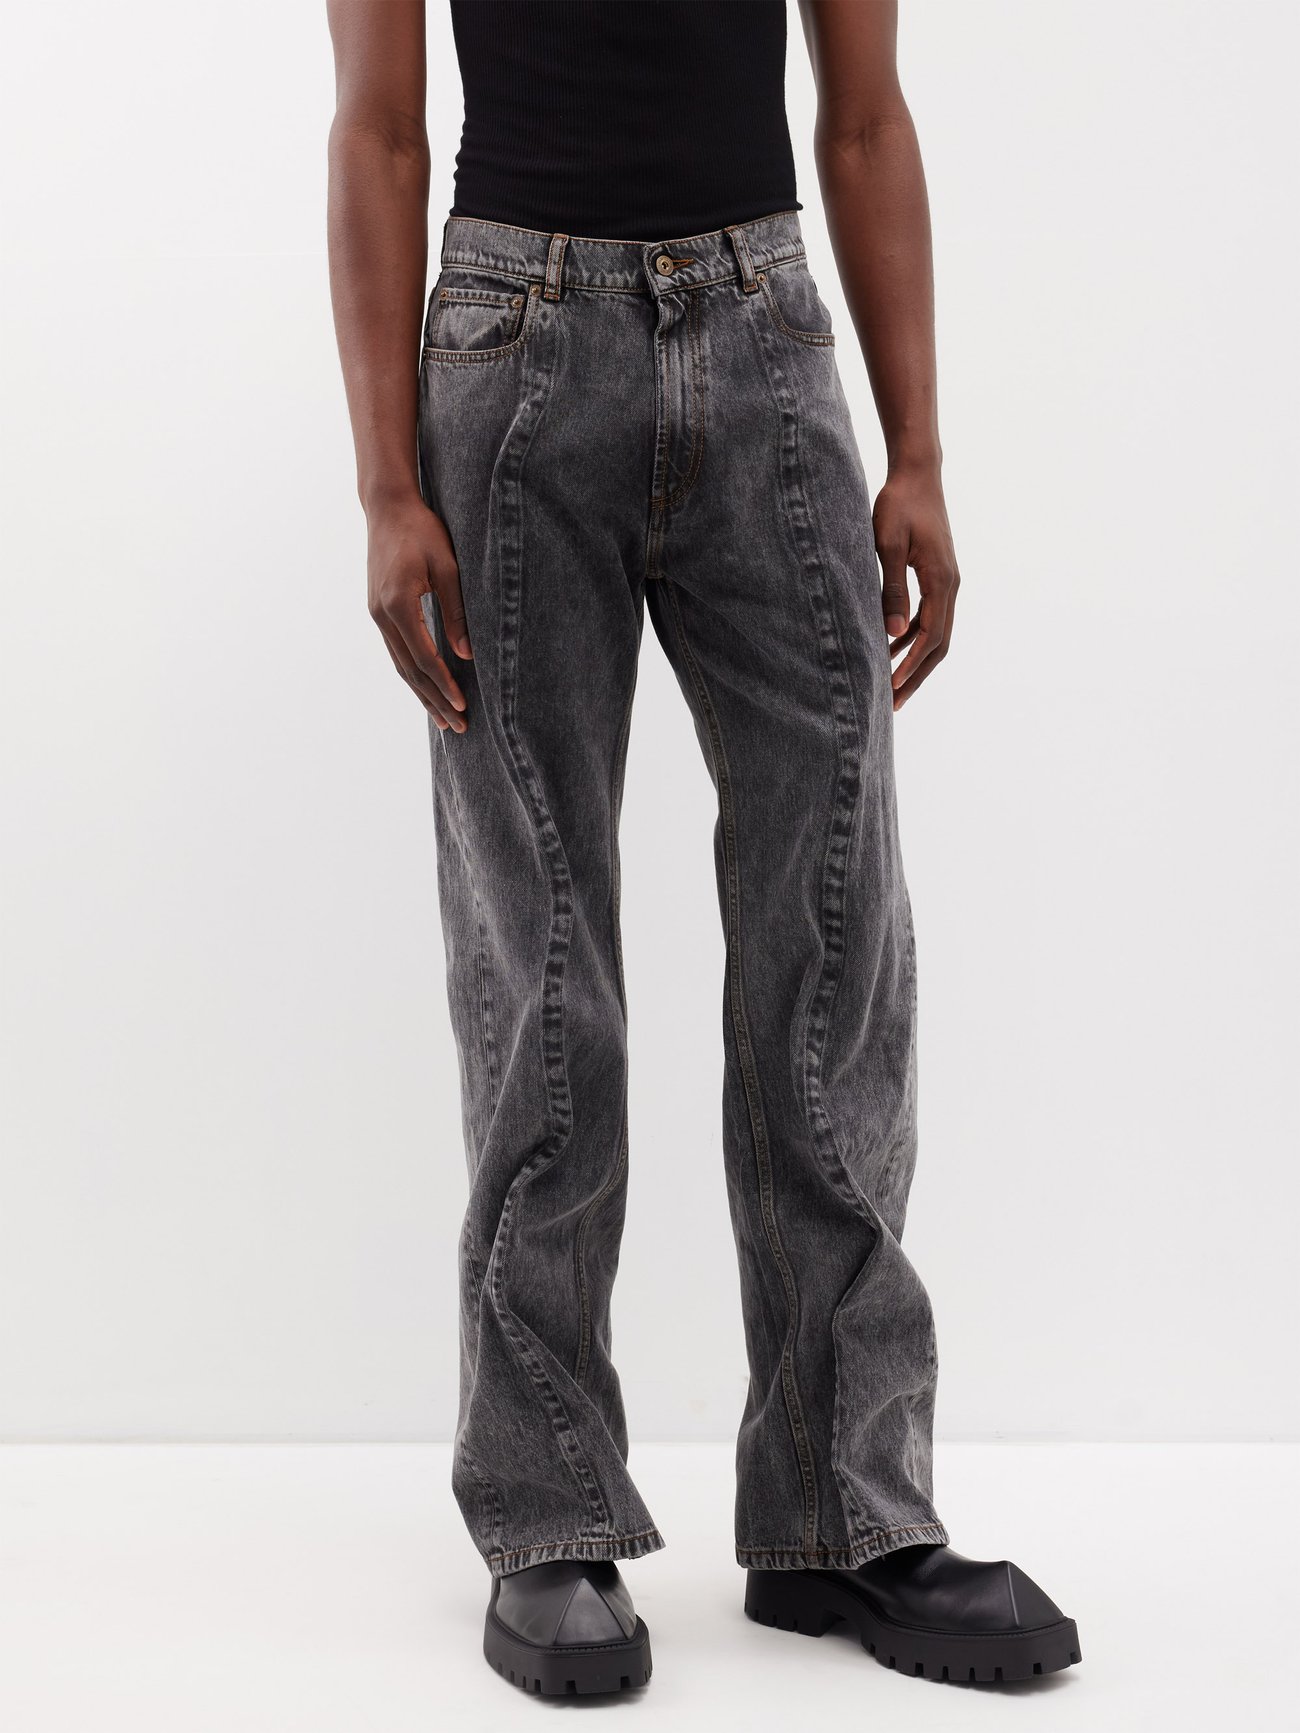 Evergreen Wire organic-cotton jeans